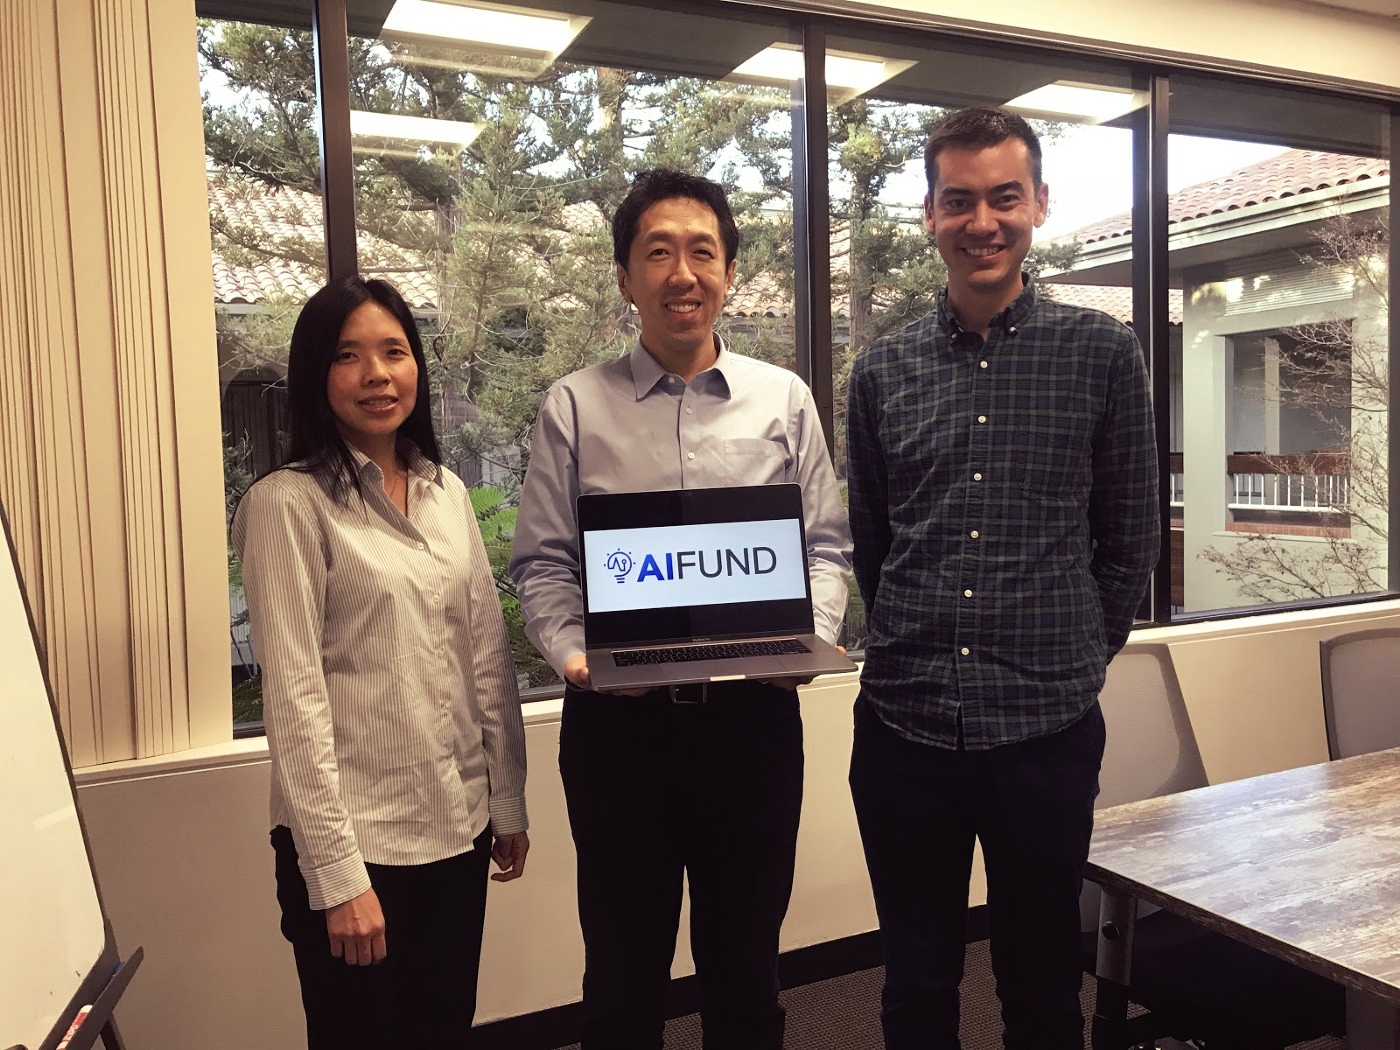 The AI guru announced the formation of a startups incubator with the aim of building transforming companies and improving human life. - Photo: Andrew Ng.